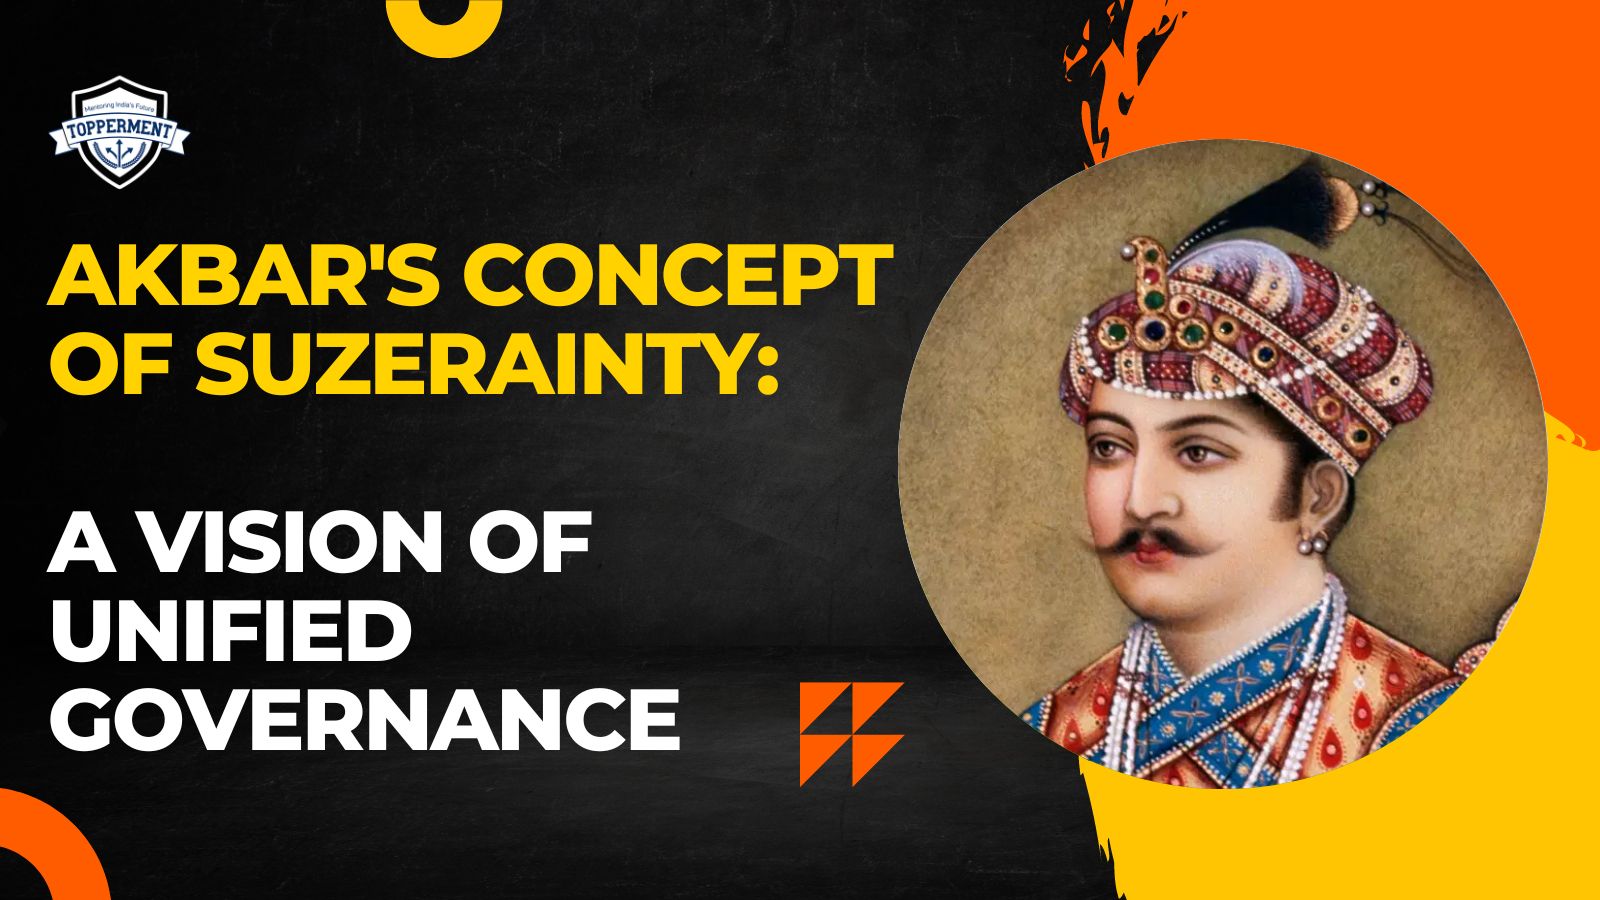 Akbar's Concept of Suzerainty: A Vision of Unified Governance - Topperment